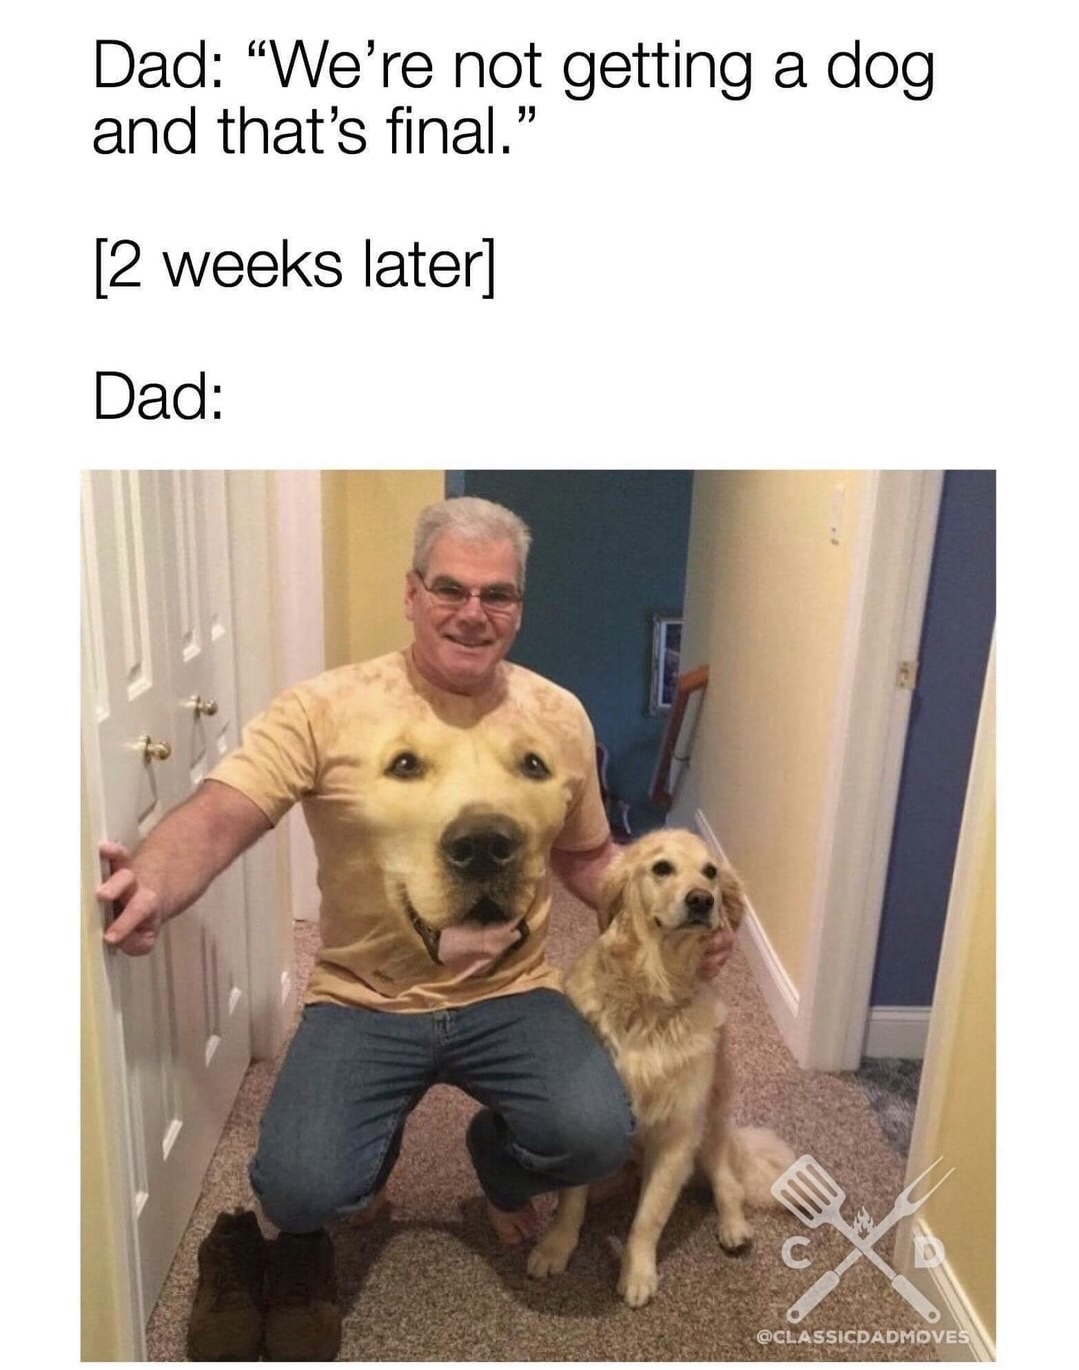 memes - dad after getting dog - Dad We're not getting a dog and that's final." 2 weeks later Dad